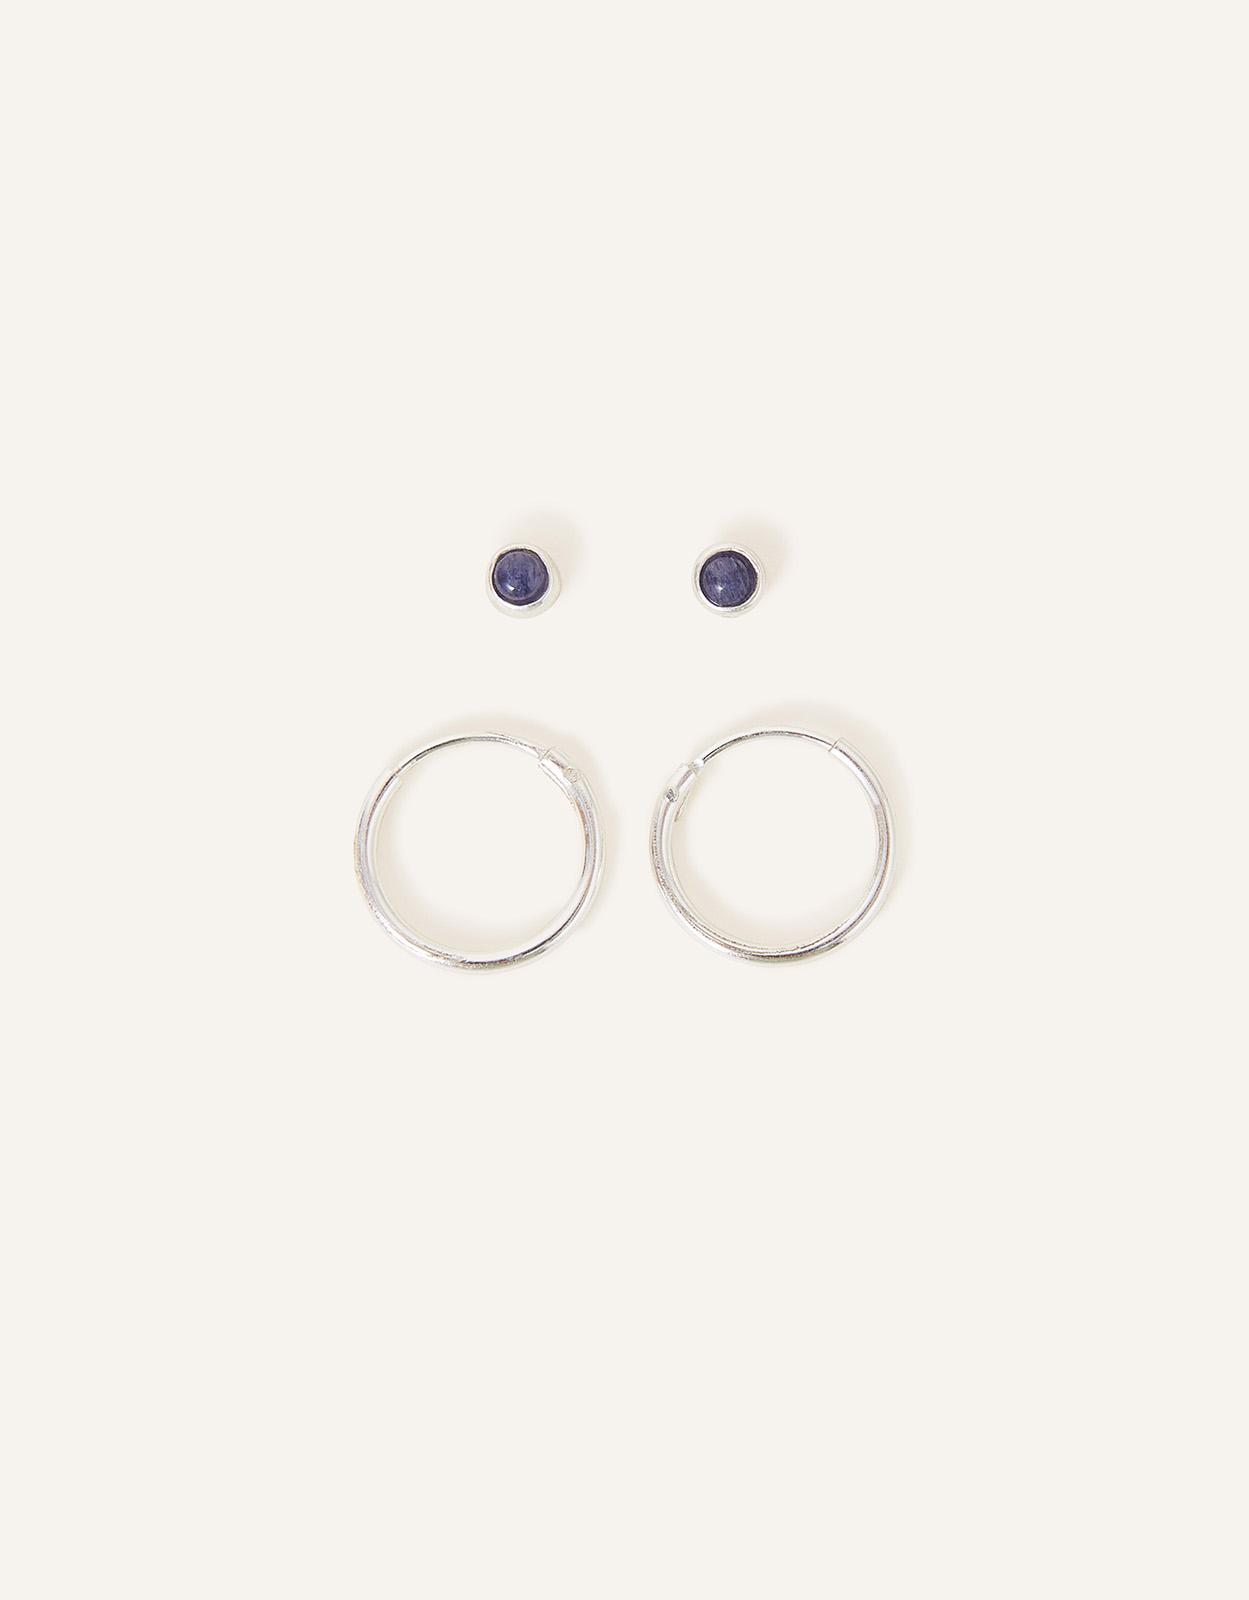 Accessorize Women's Sterling Silver and Navy Blue Set of Two Aventurine Stud Hoops, Size: 5cm